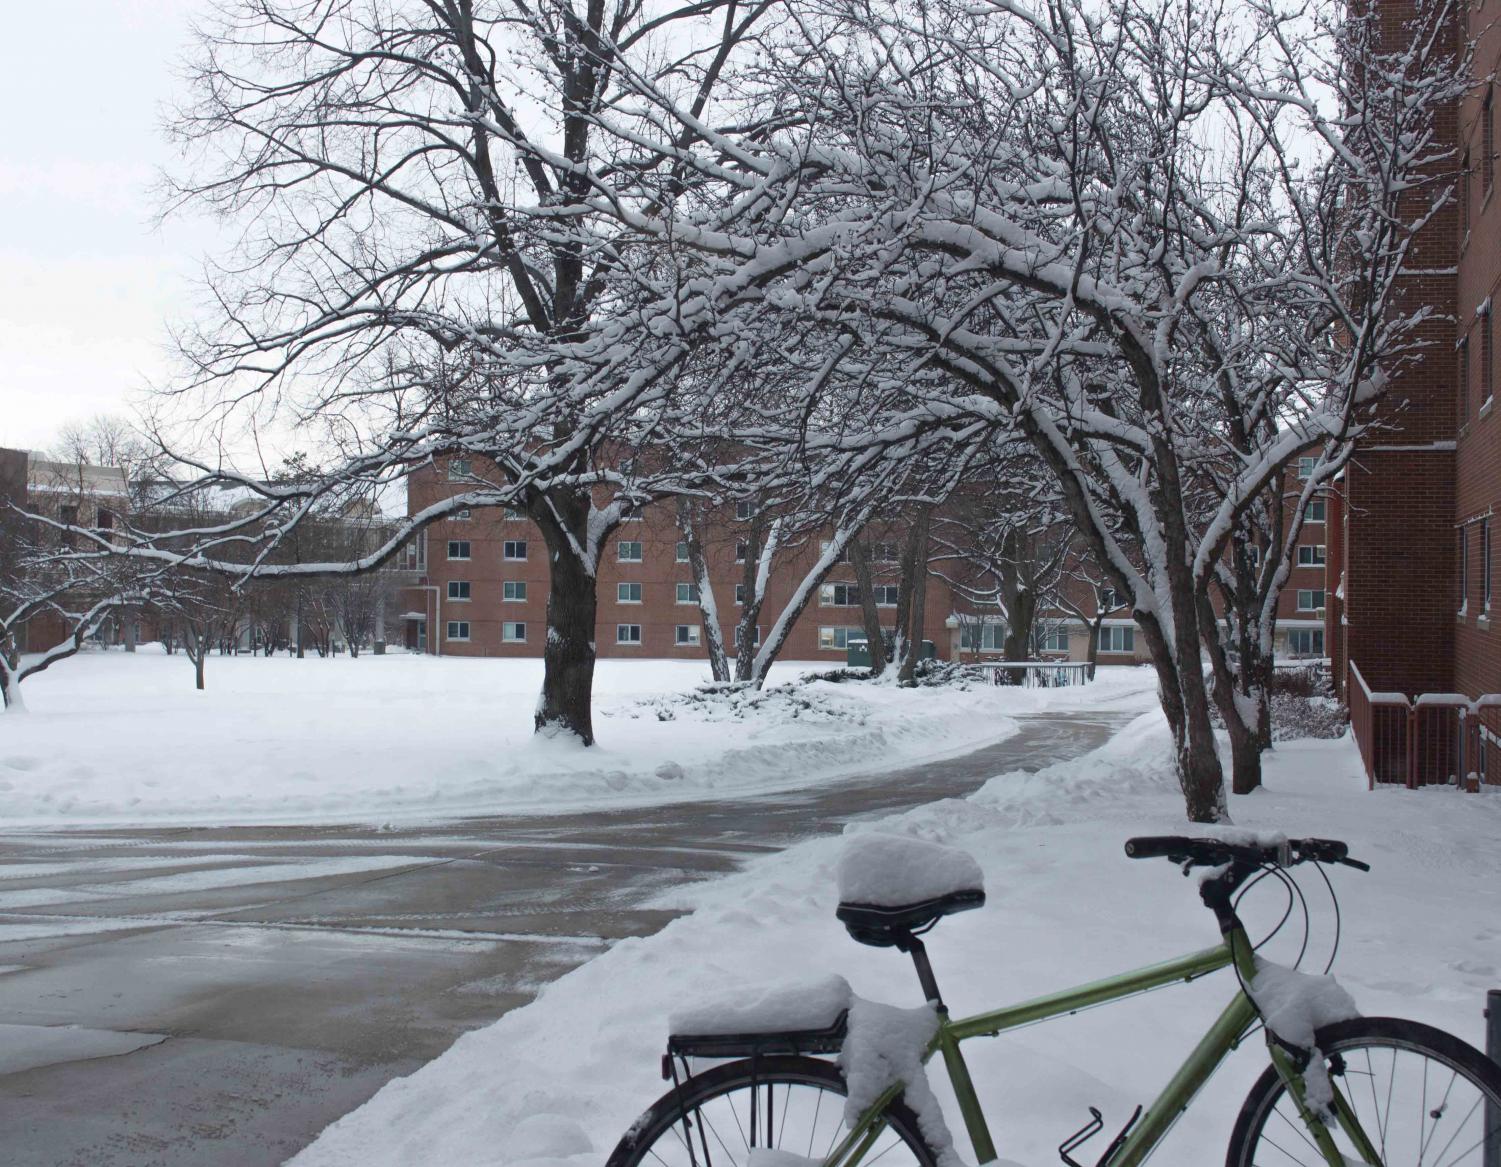 Winter+is+coming%2C+but+will+classes+be+canceled%3F